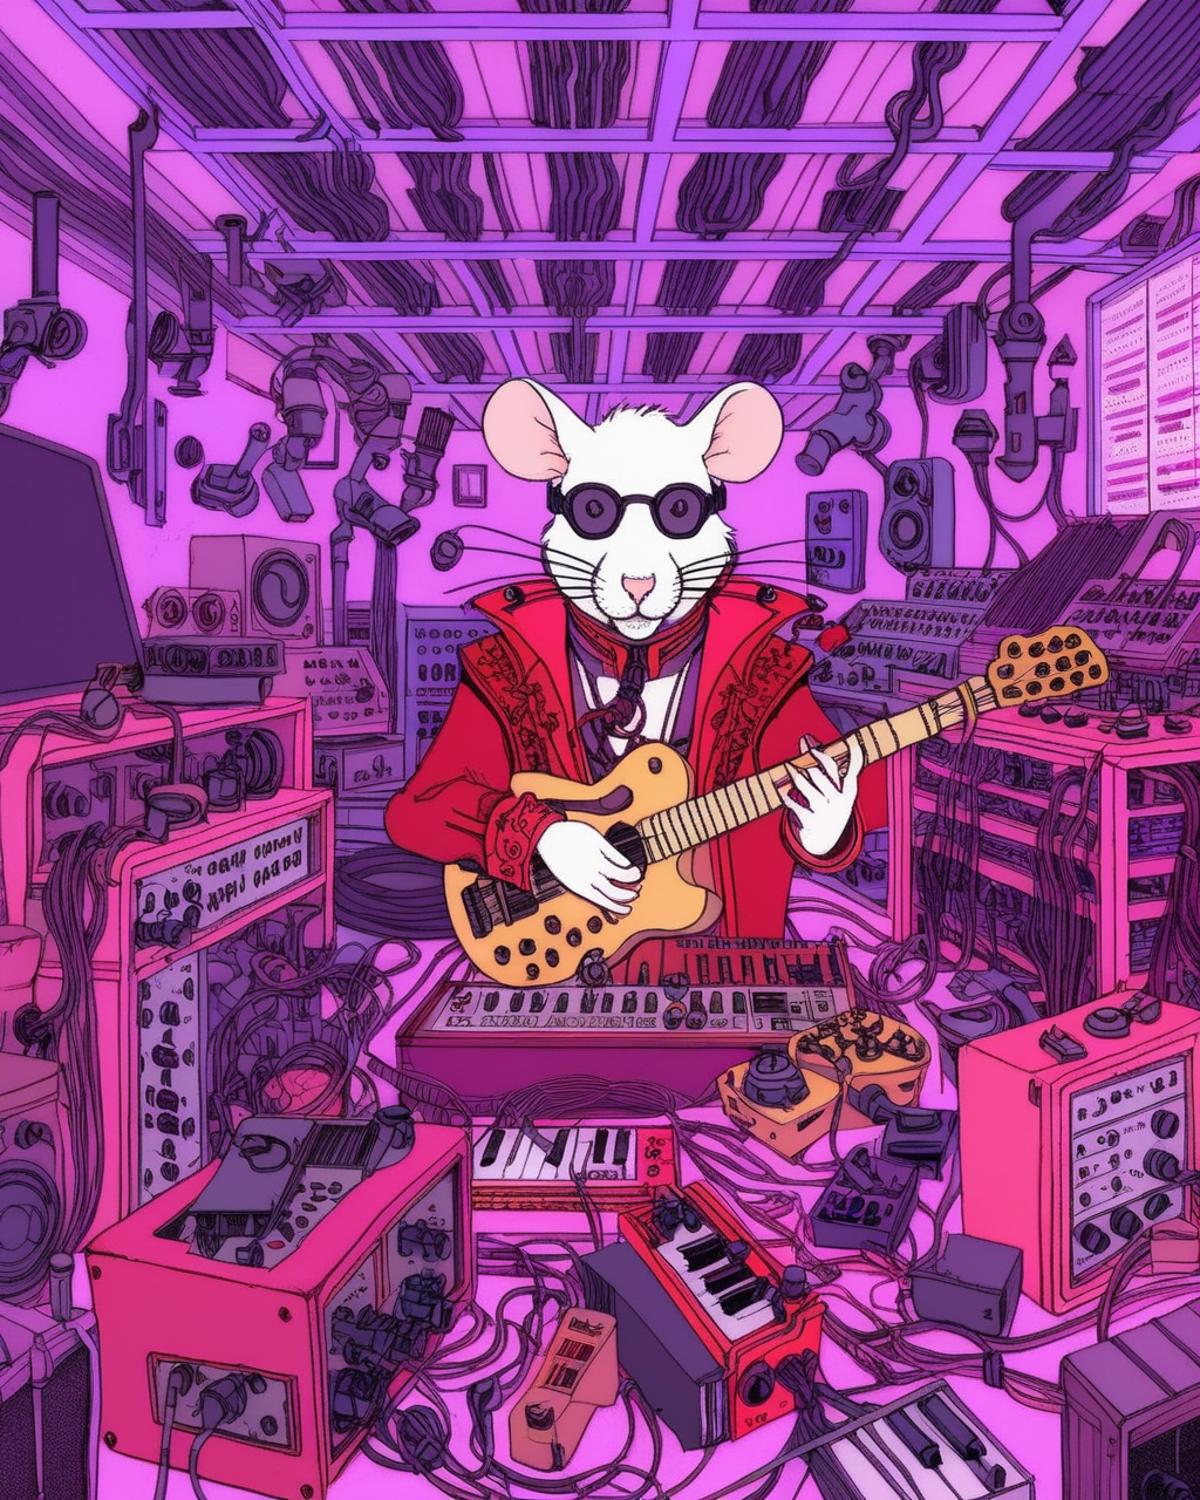 A man playing a guitar in the middle of a room full of electronic equipment.